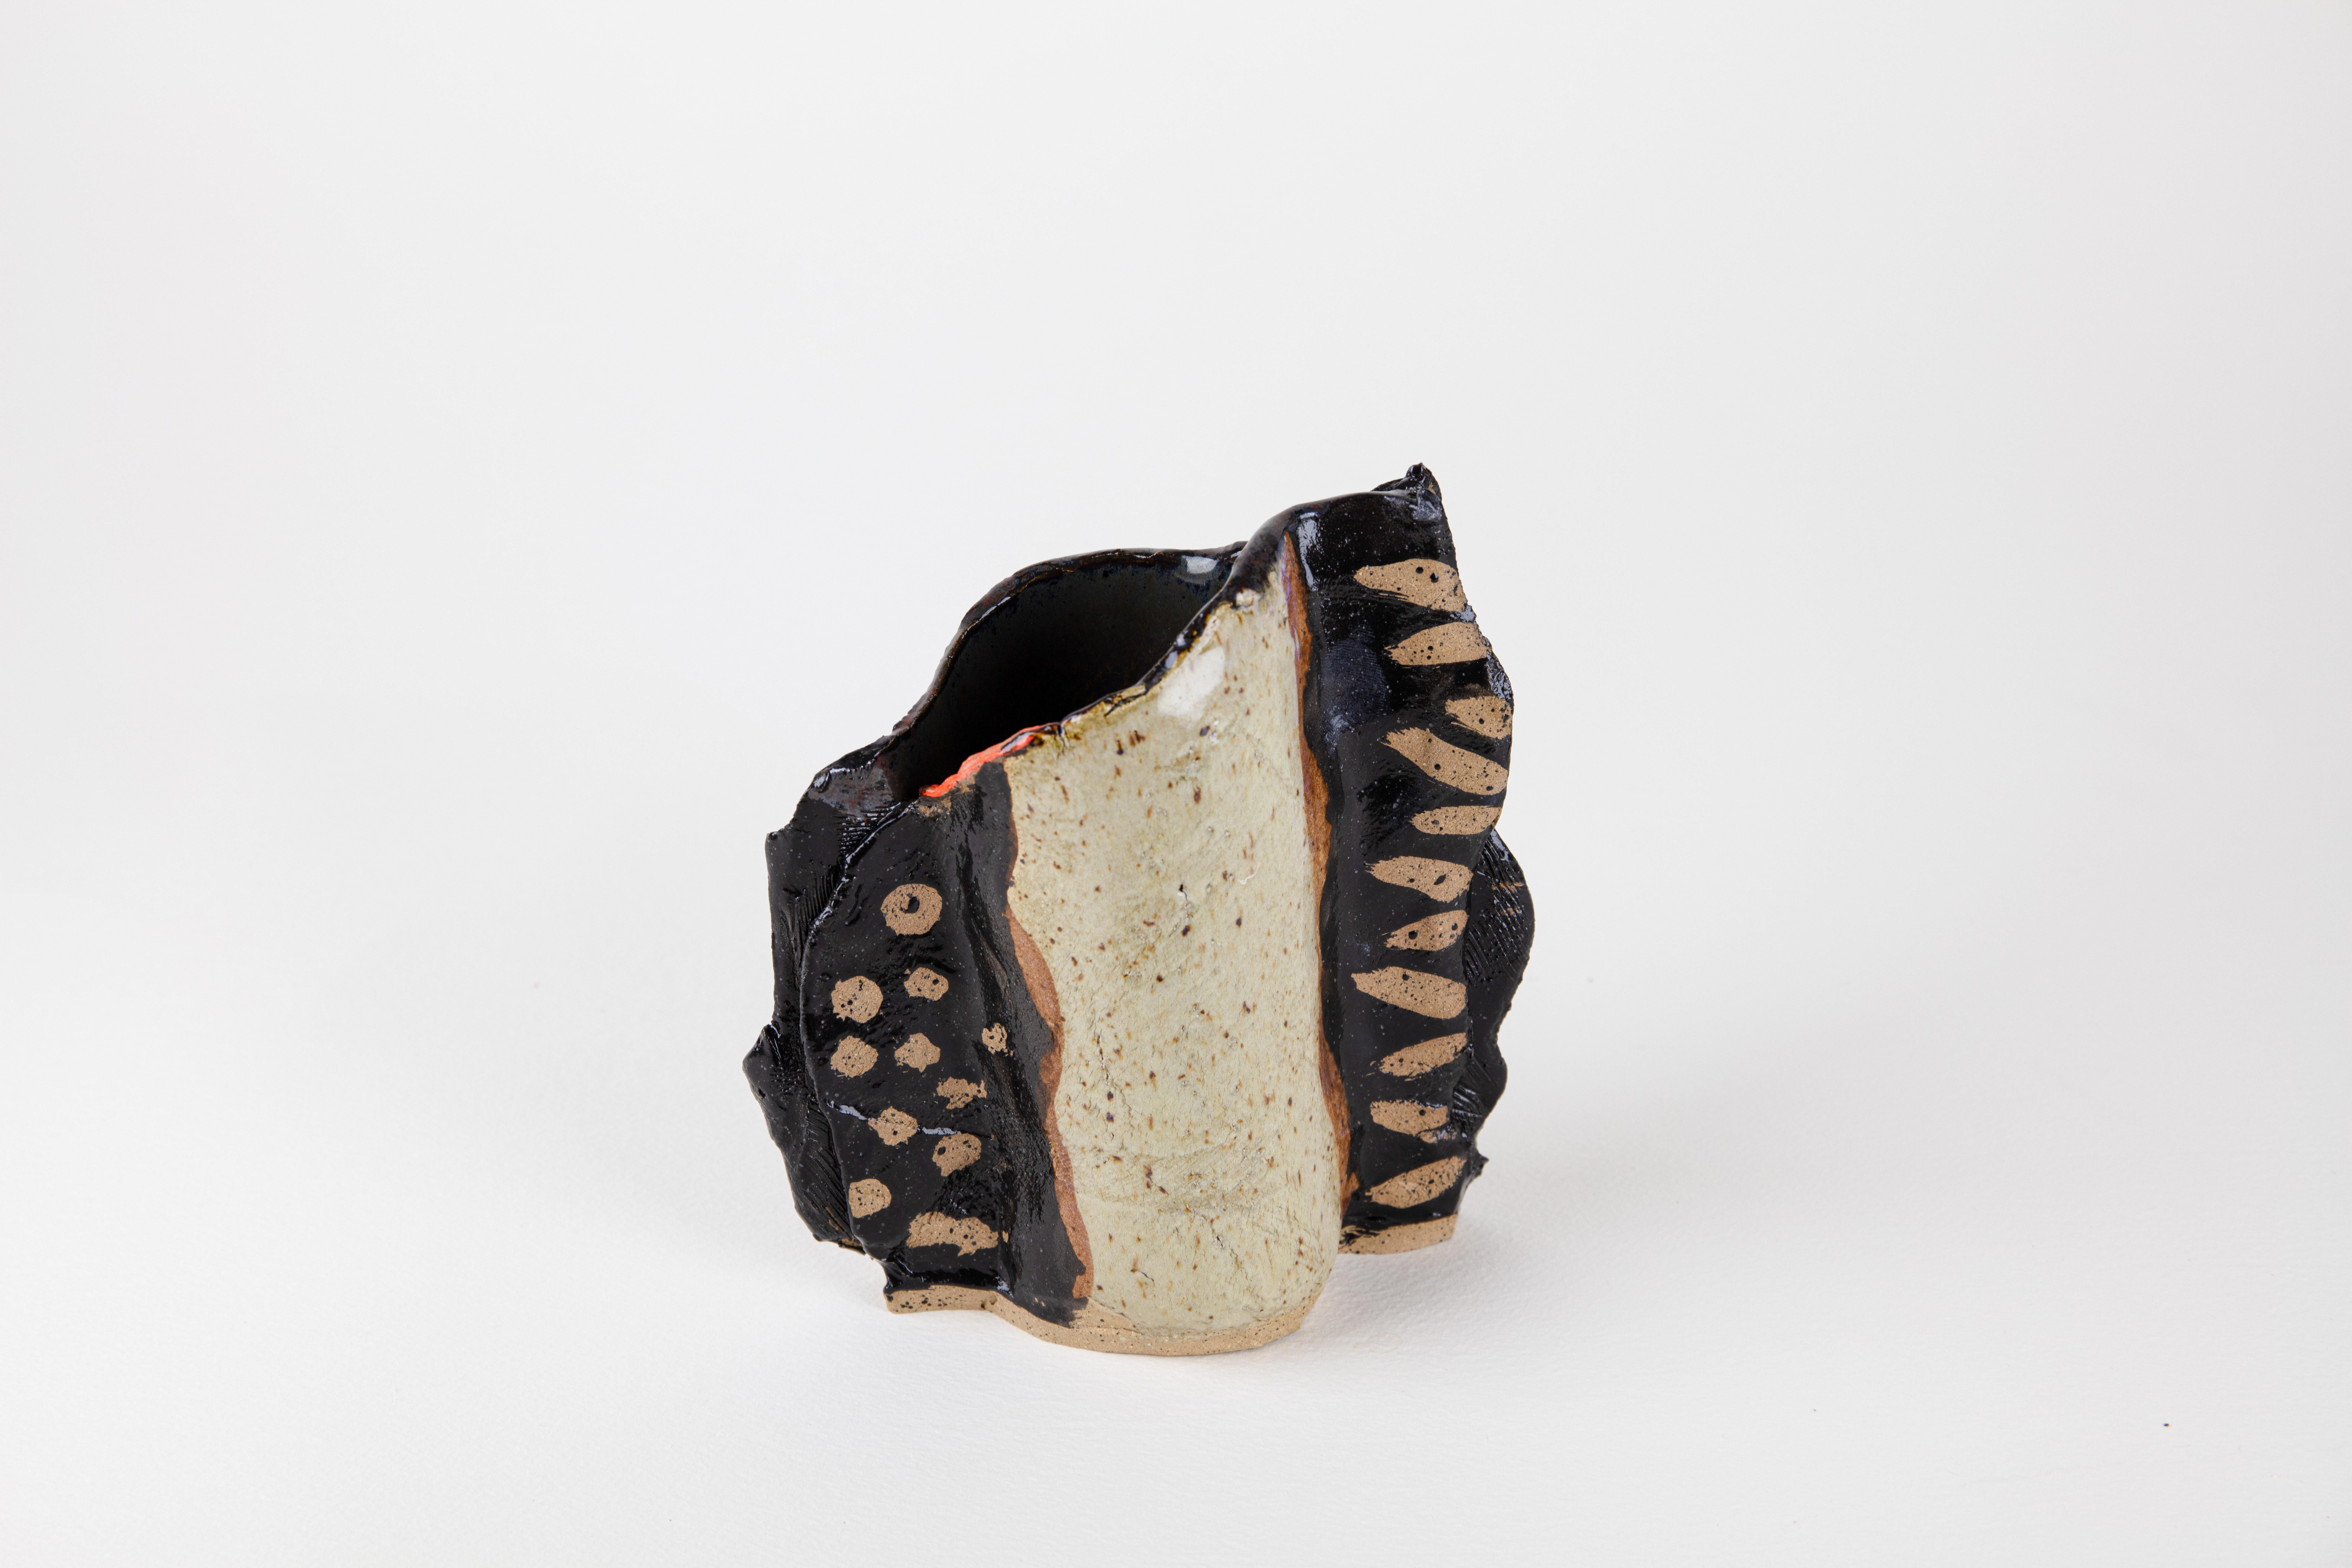 Small Bark Vessel, Abstract ceramic sculpture, neutral colors